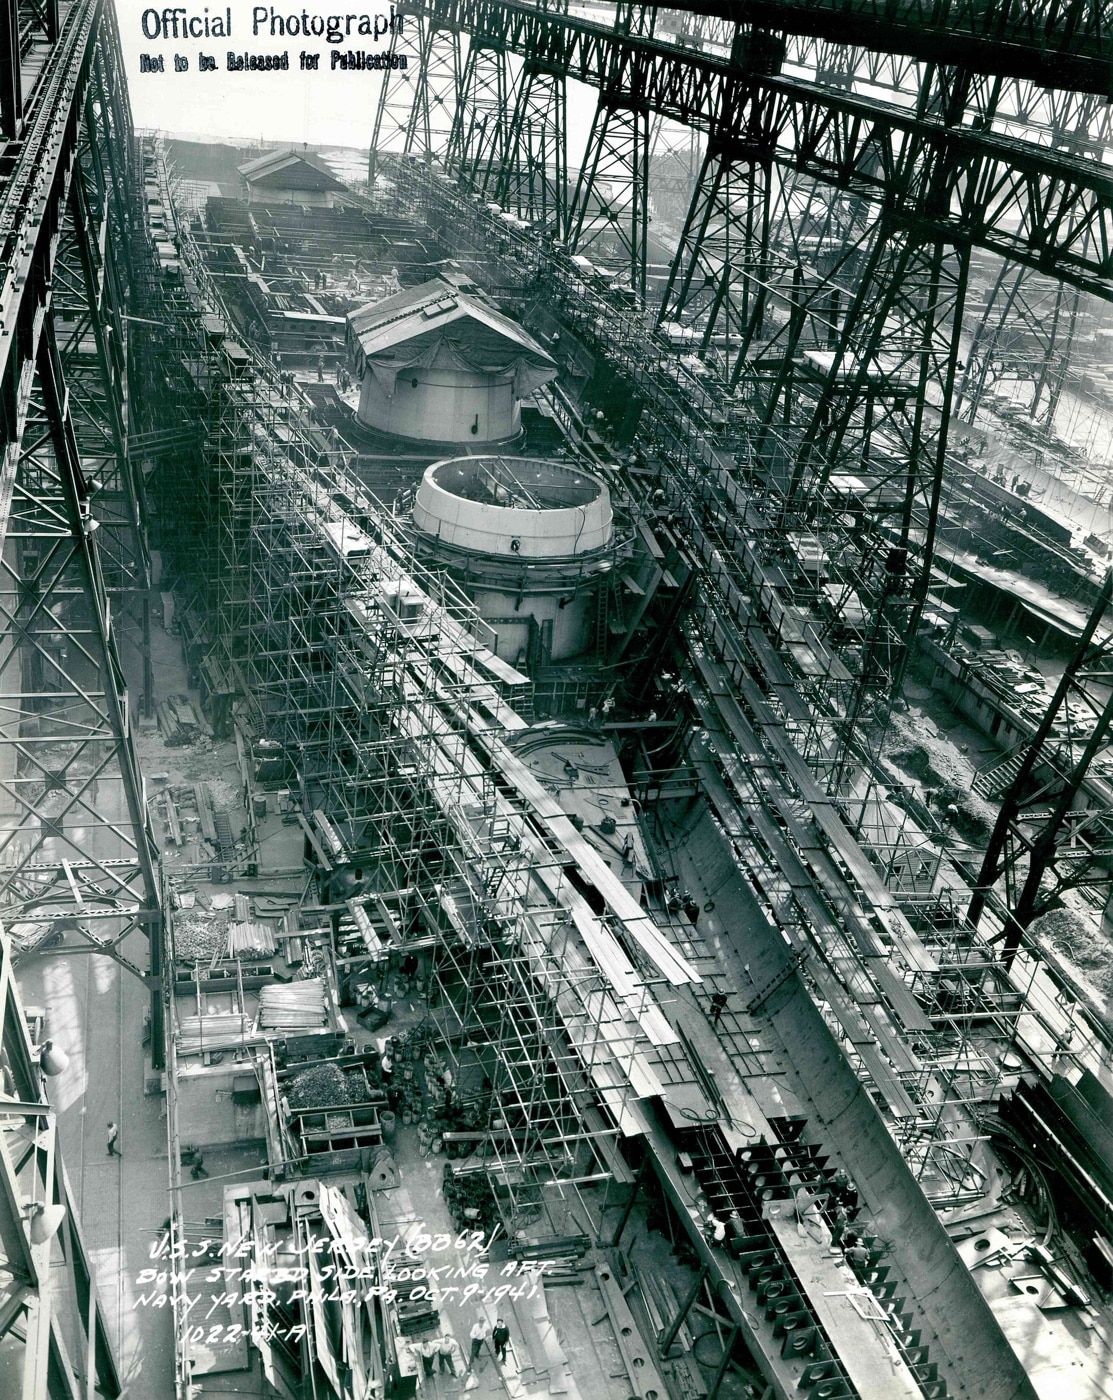 USS New Jersey being built constructed 1941